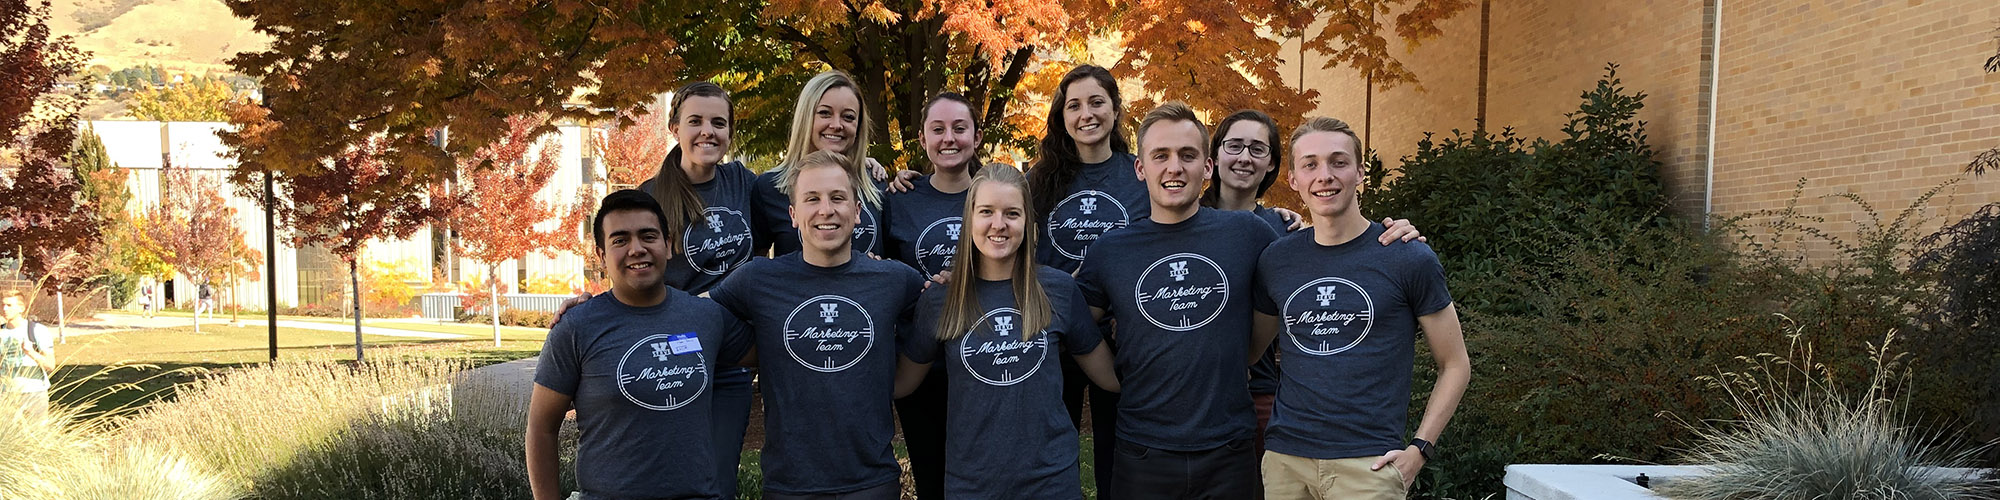 The ten student marketing team stand together for a picture.